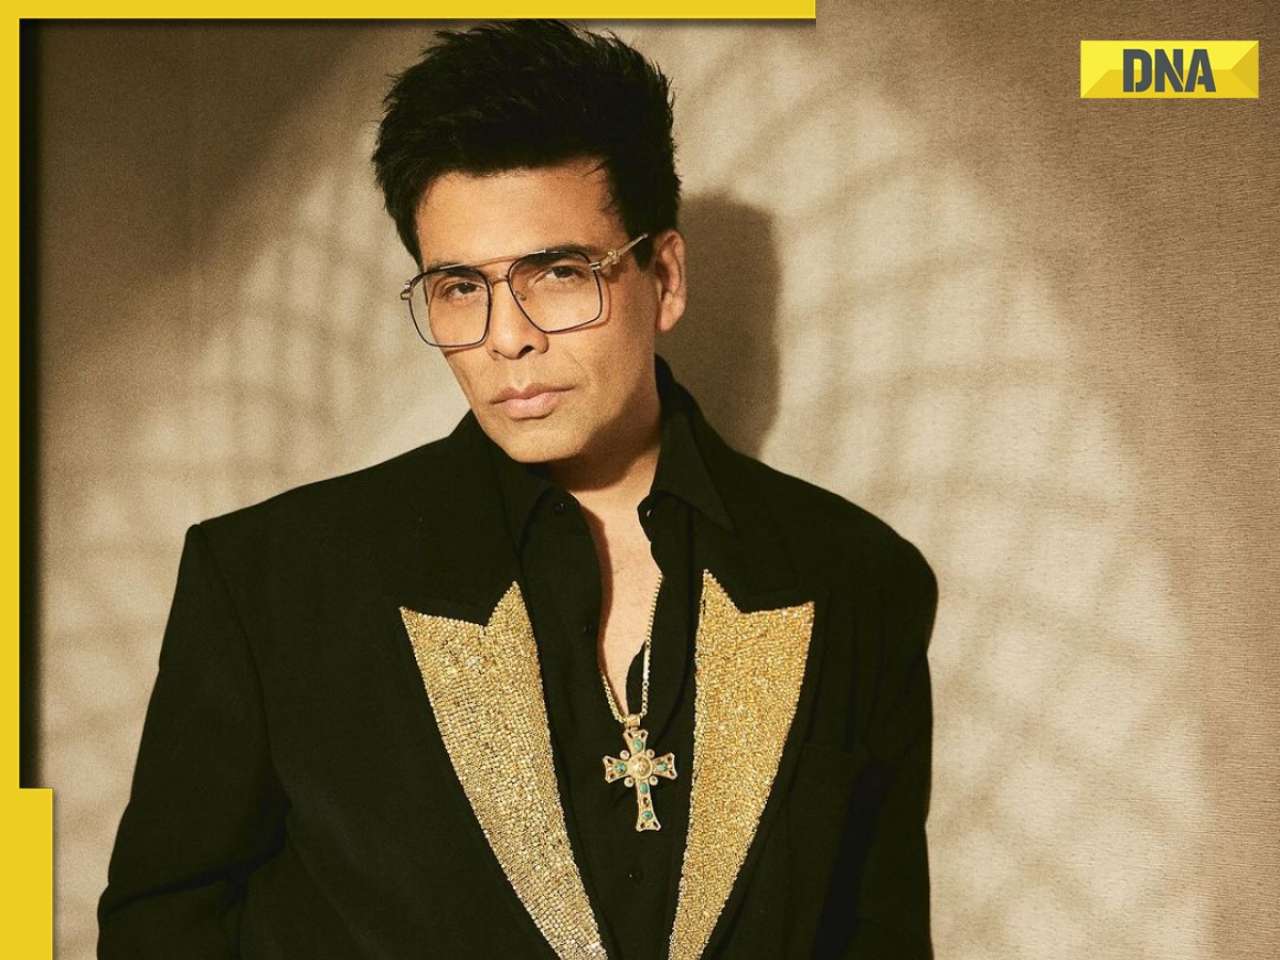 Karan Johar slams comic for mocking him, bashes reality show for 'disrespecting' him: 'When your own industry...'